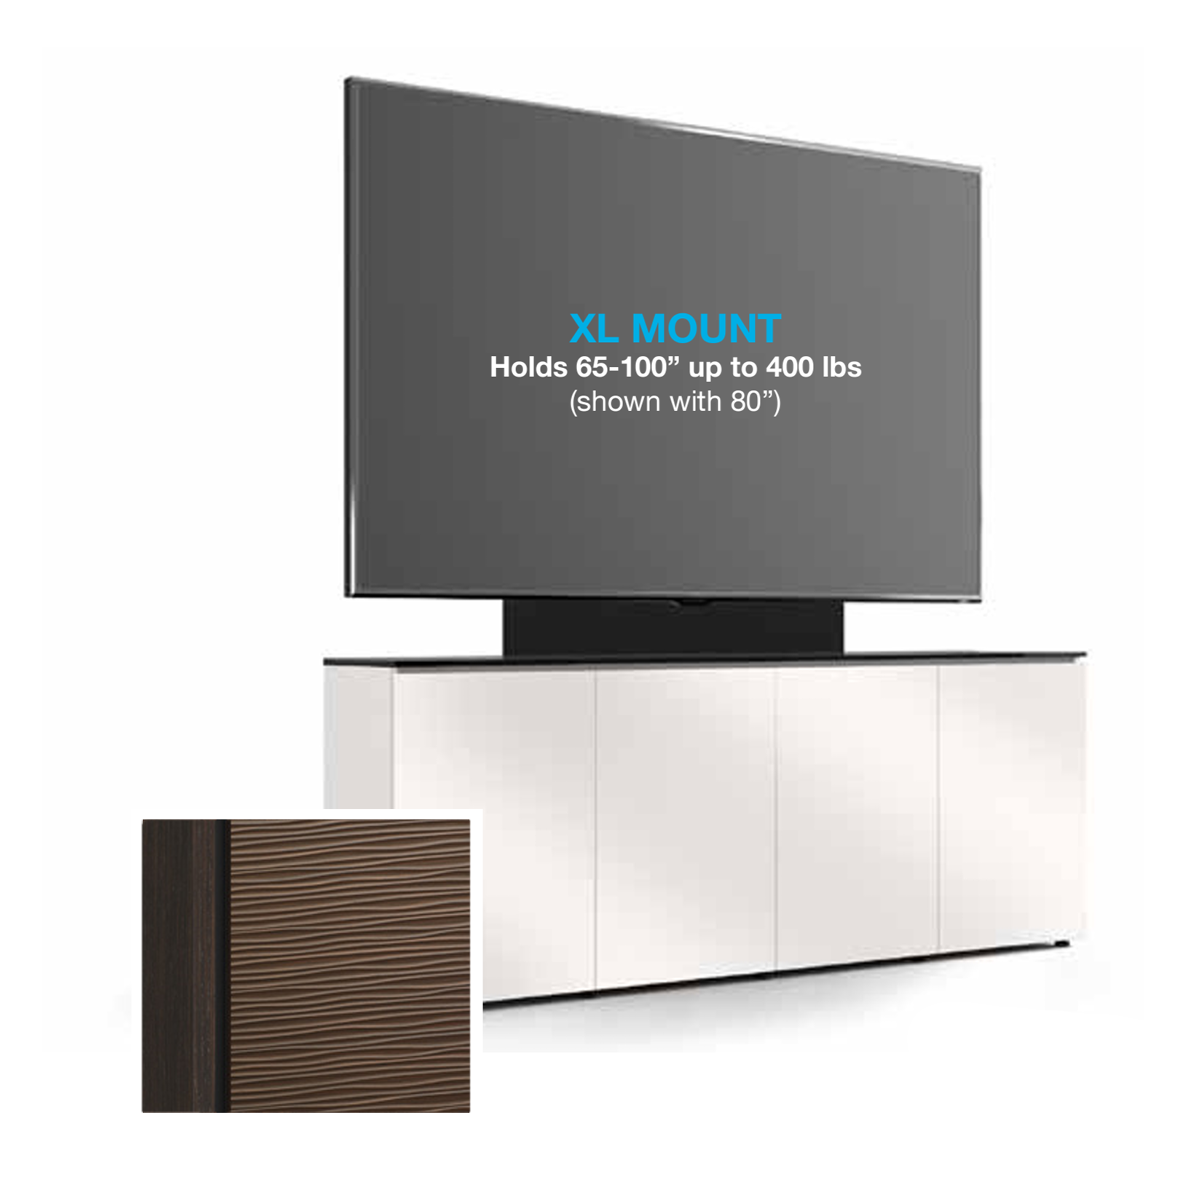 D1/347AMXL/BL/WE 4 Bay, Single XL Monitor Low-Profile, Wall Cabinet, Berlin/Wave Texture- Wenge